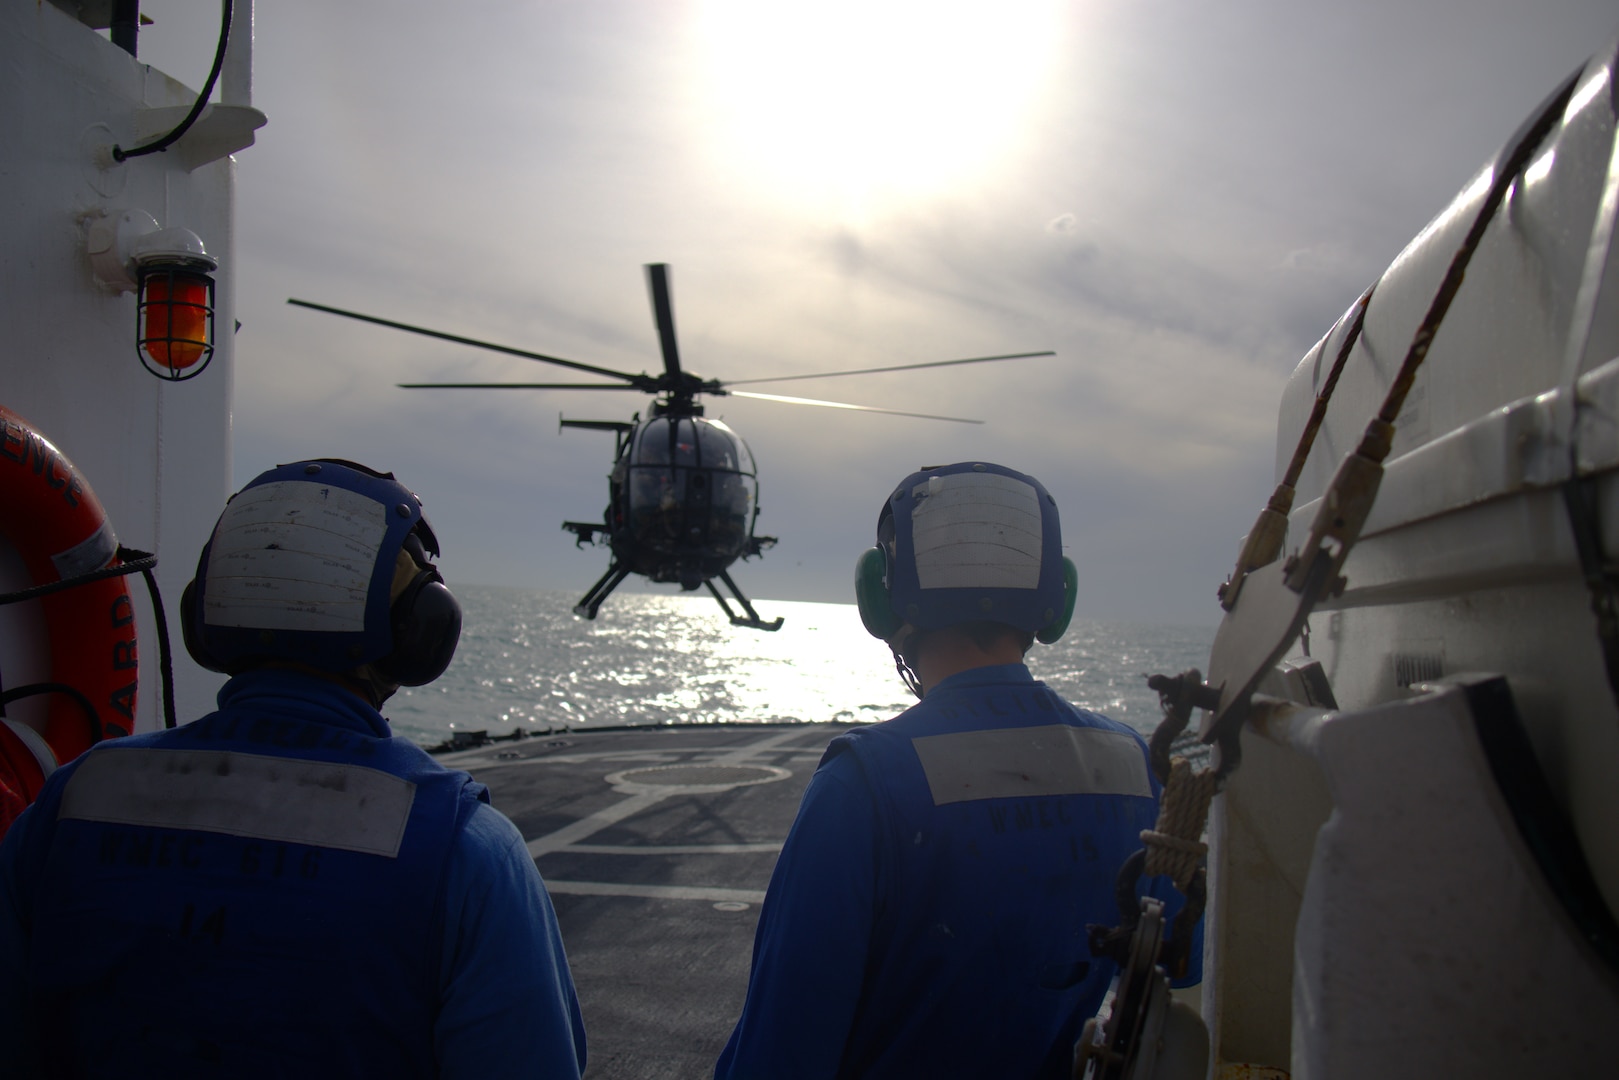 The crew of U.S. Coast Guard Cutter Diligence (WMEC 616) conducts joint training with the U.S. Army 160th Special Operations Aviation Regiment off the coast of Tampa, Florida, Dec. 12, 2023. During the exercise, the Diligence crew and pilots from SOAR completed daytime and nighttime helicopter landing evolutions.